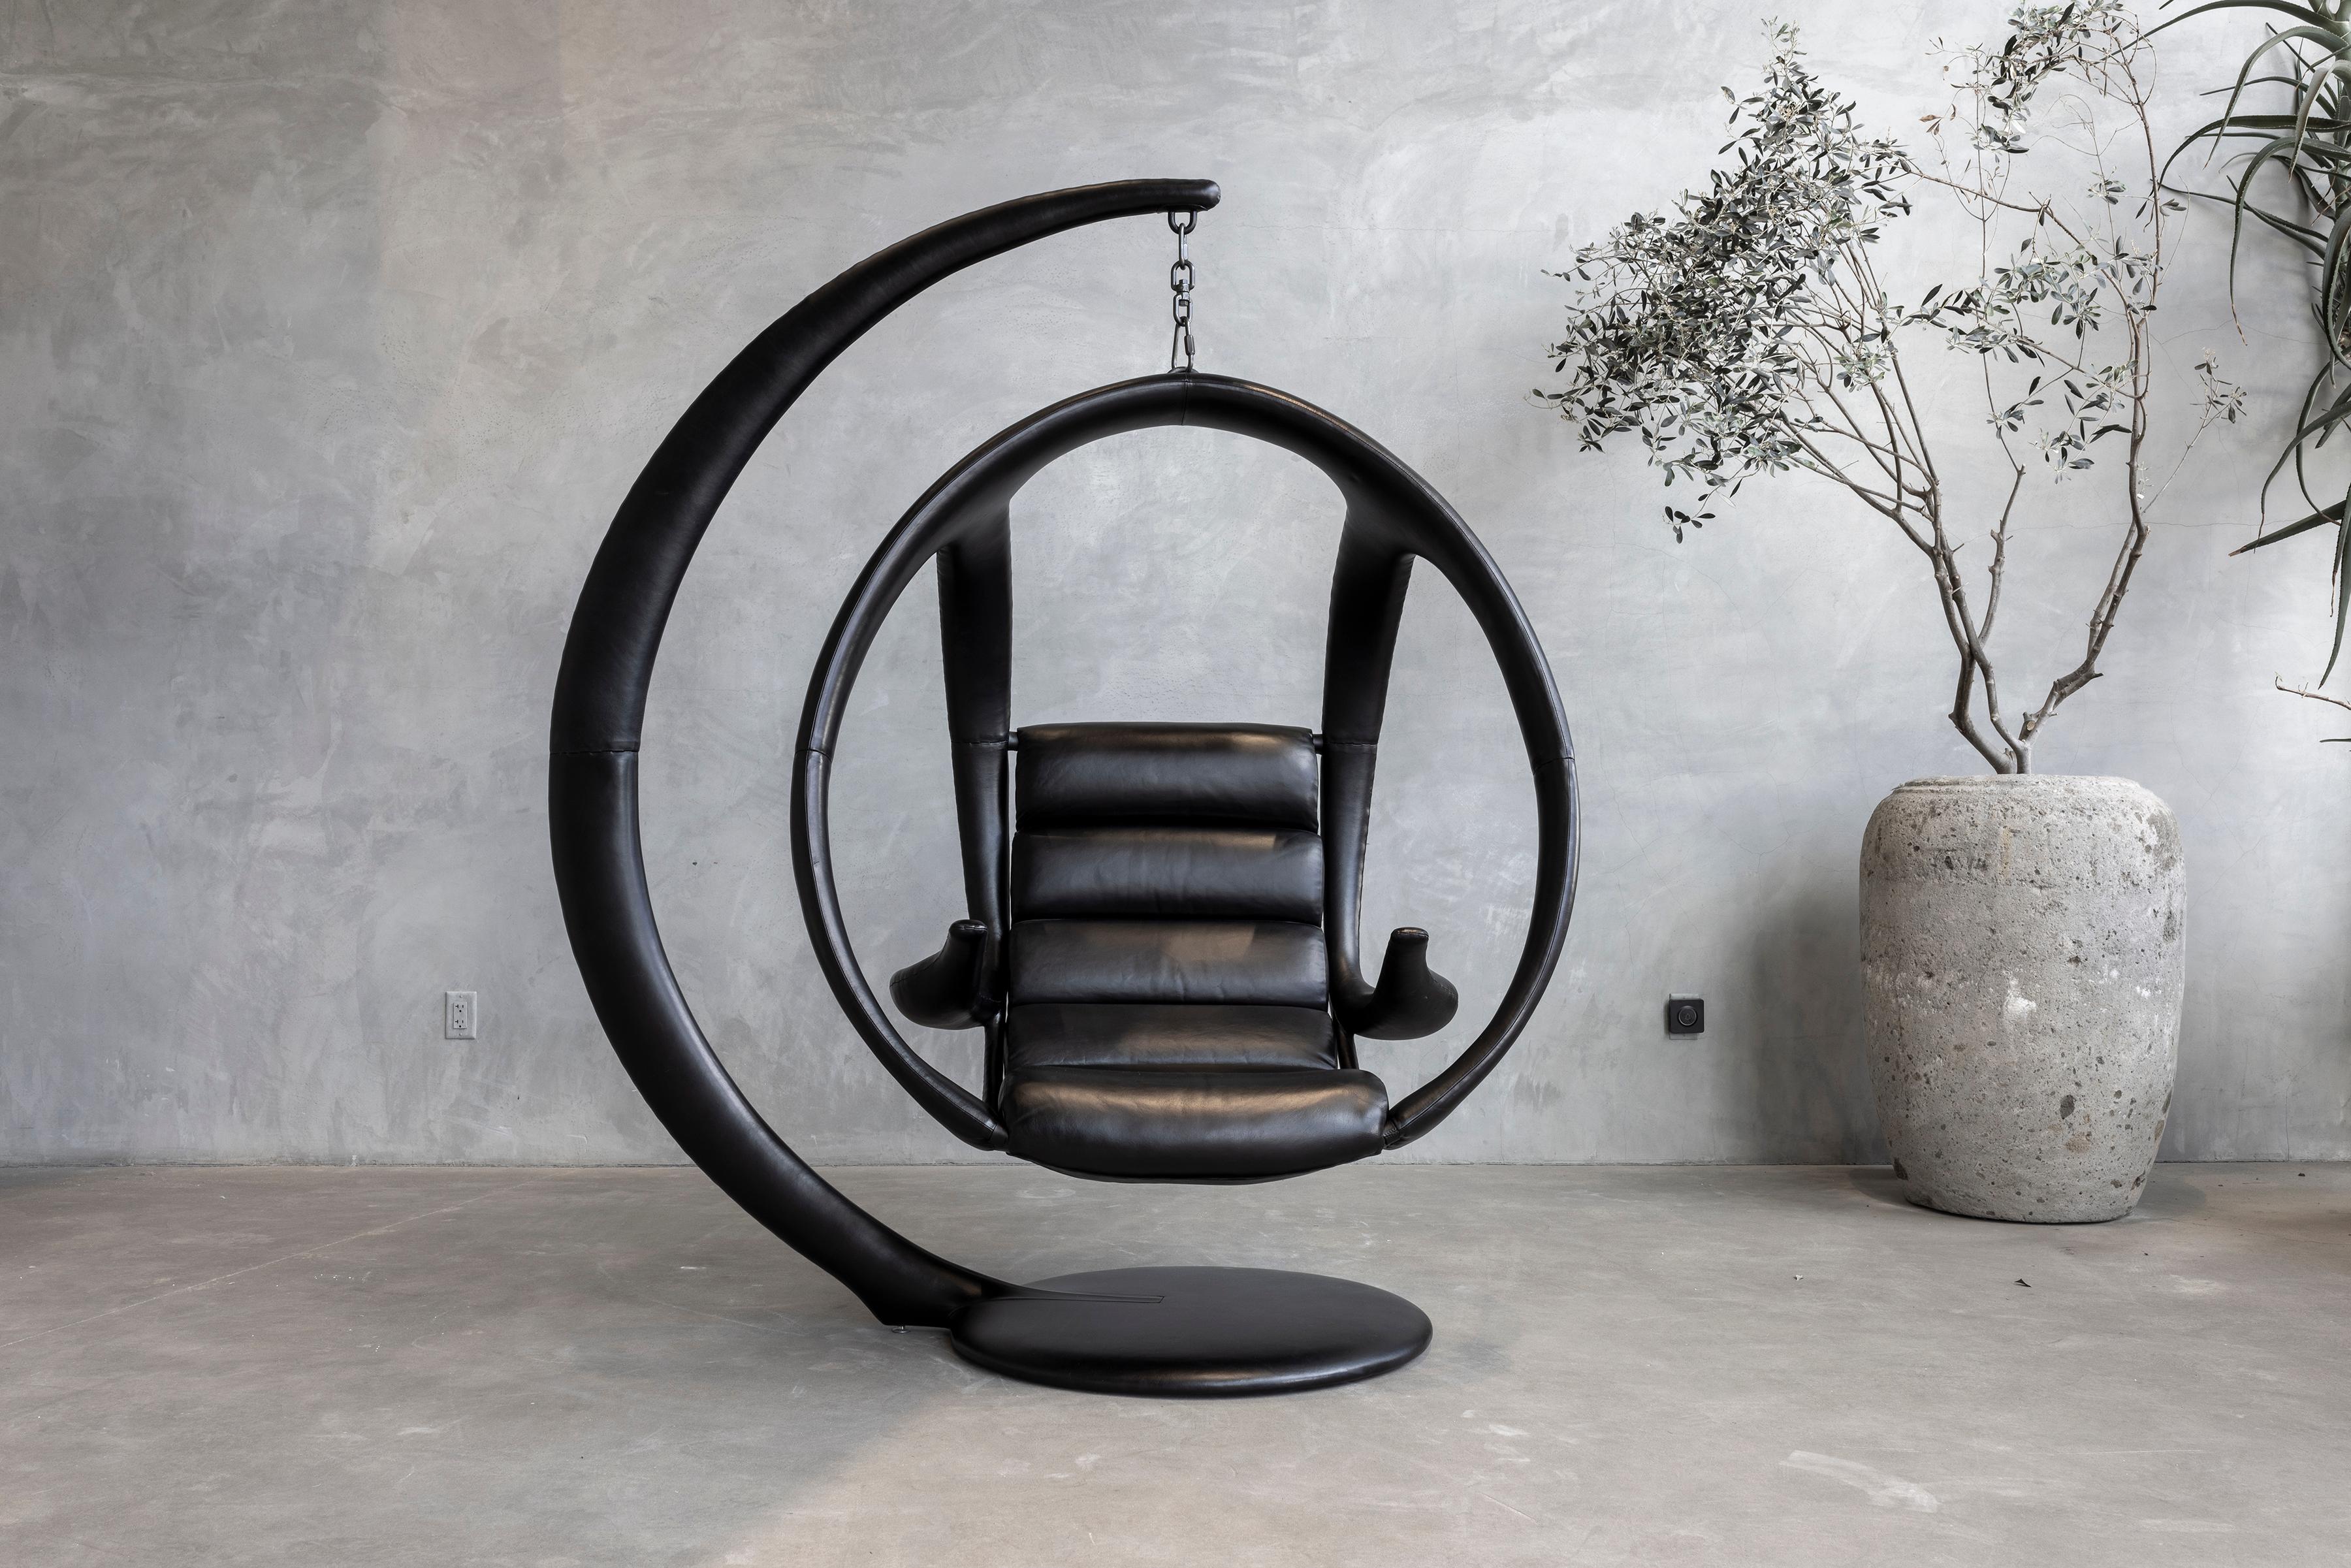 Ab Ovo Hanging Pod Chair by William Emmerson
Limited Edition Of 3 Pieces.
Dimensions: D 99.06 x W 167.64 x H 208.28 cm. SH: 45.72.
Materials: Brass and black leather.

Limited edition of 3 pieces, only 1 remaining. Available in black or brown